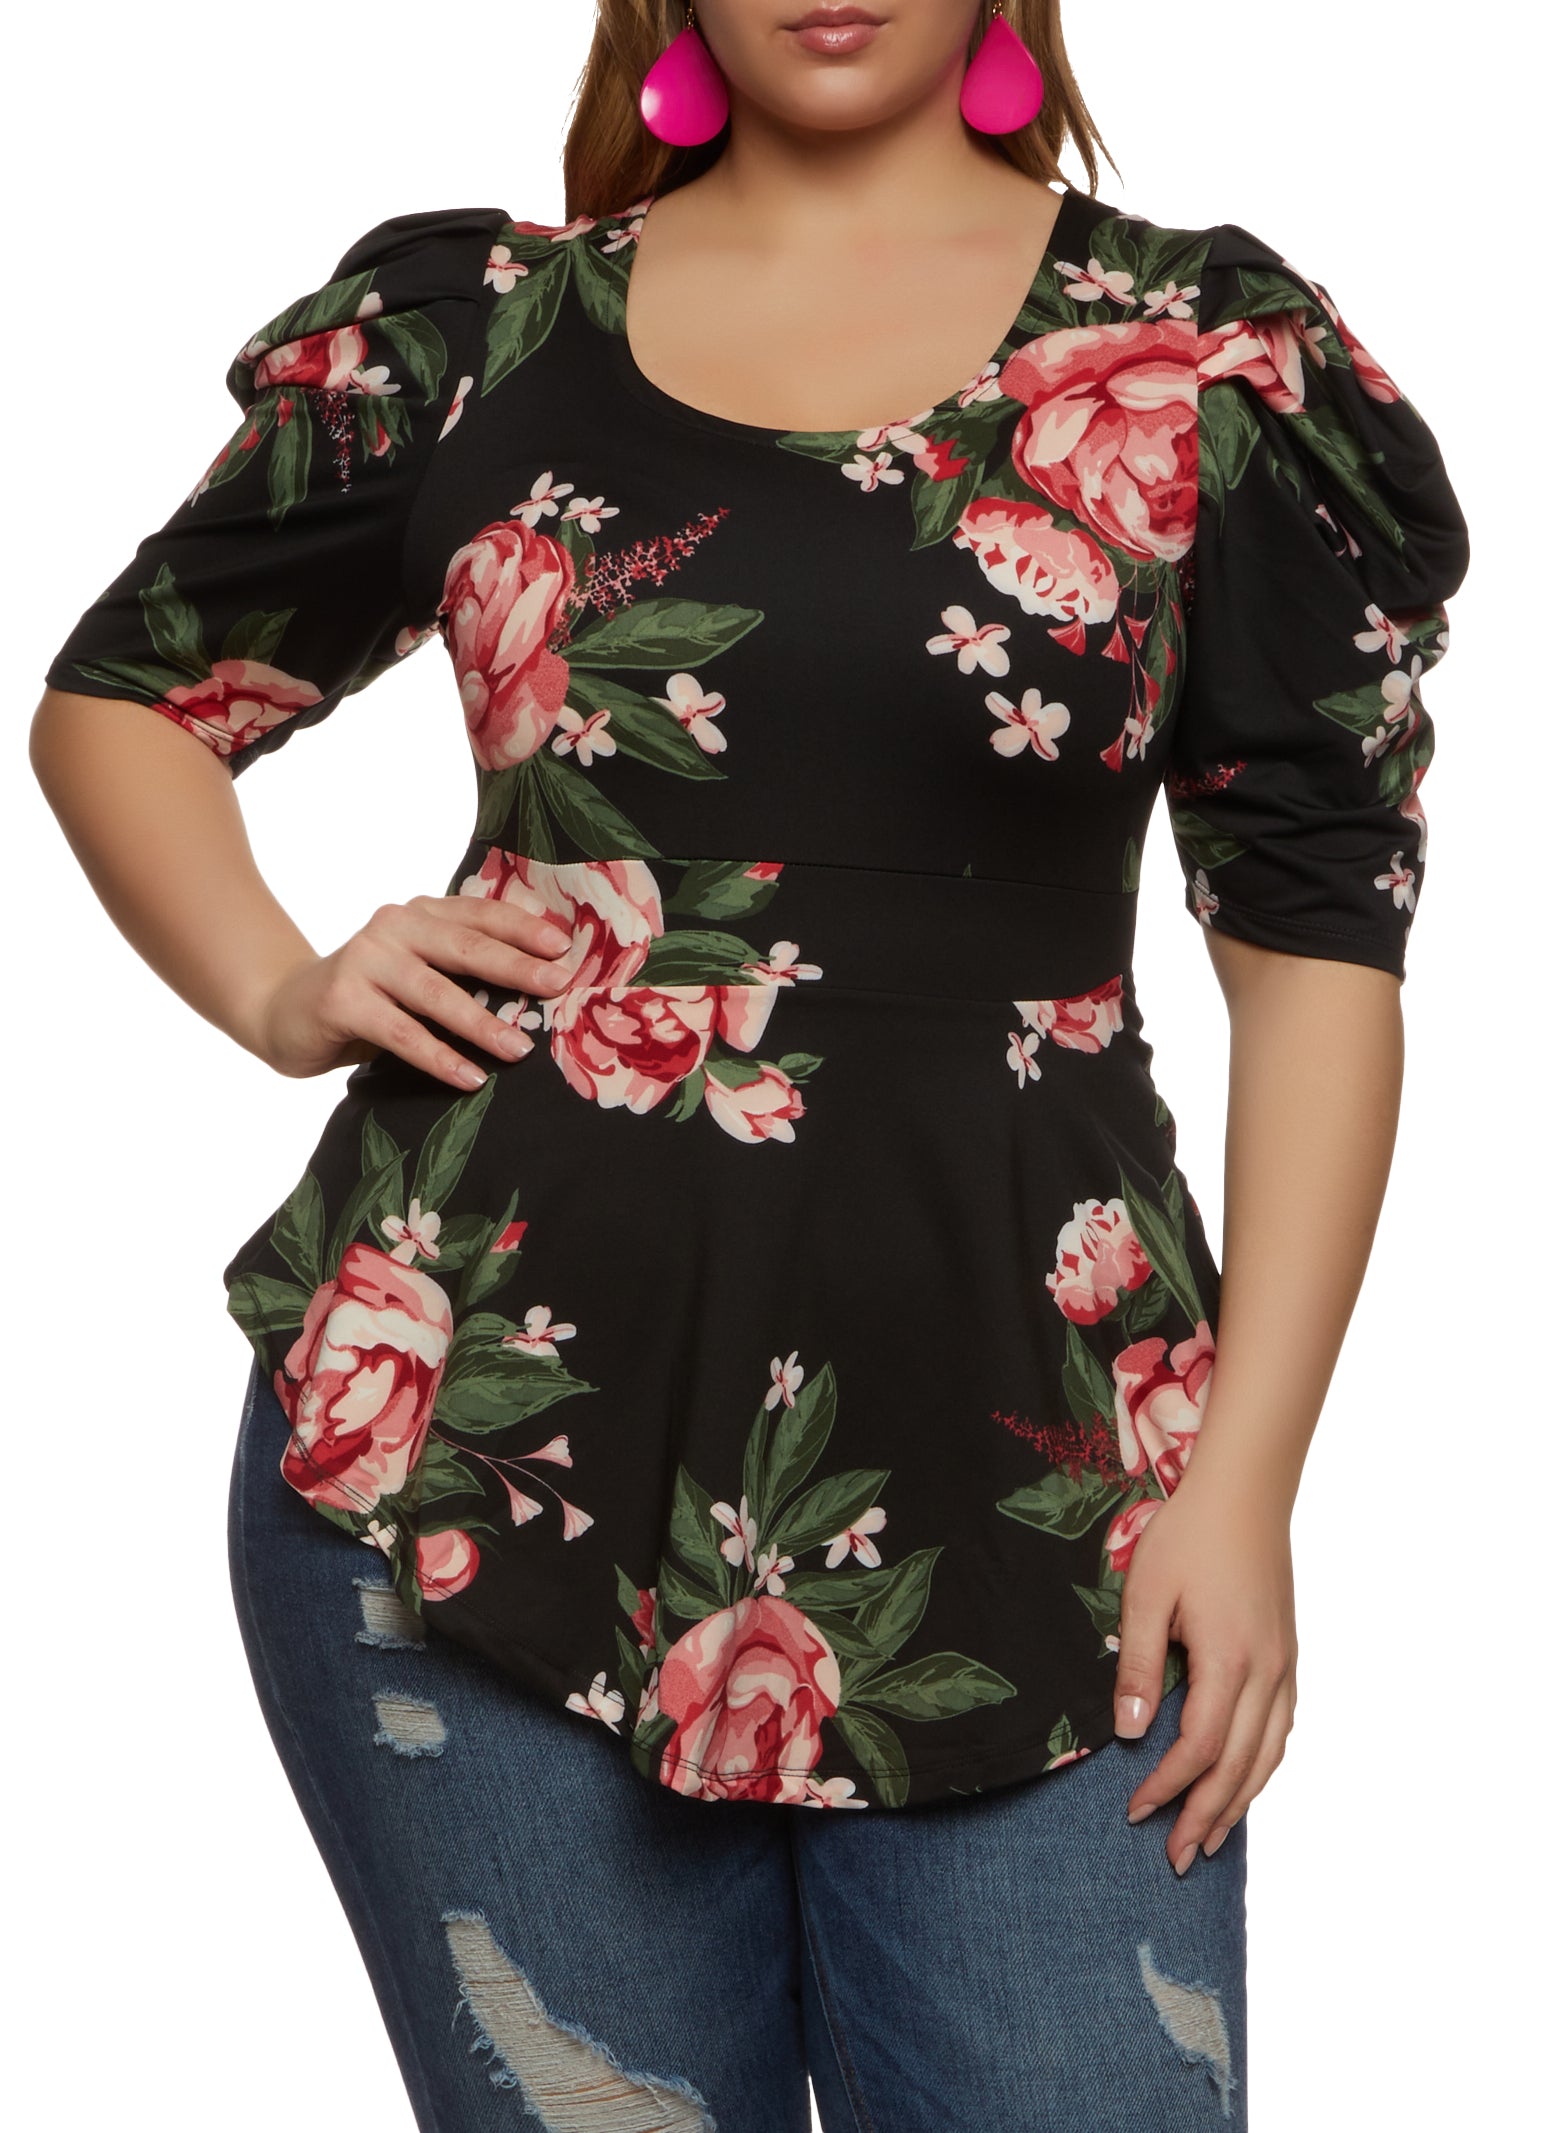 Proud Poppy Clothing Top Size 24 / Plus Size Floral / Multicoloured (s)